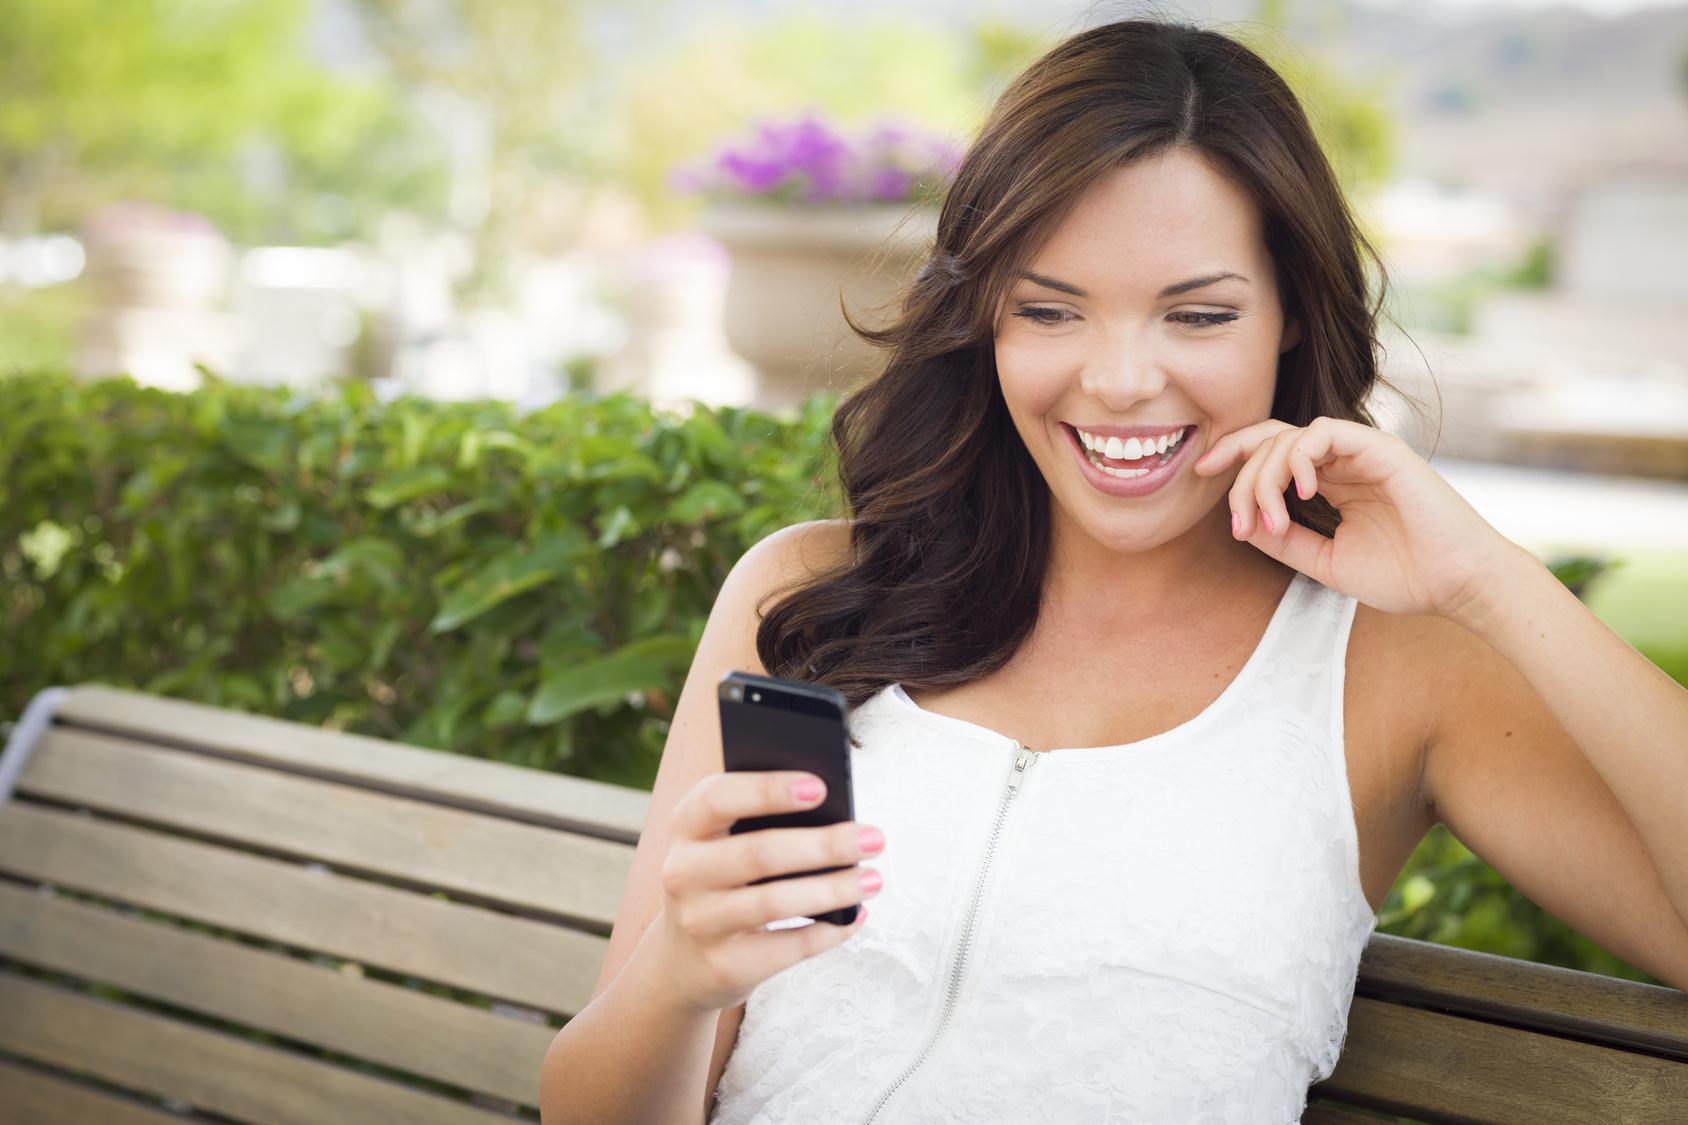 The Top 10 Dating Apps That You Won’t Regret Downloading